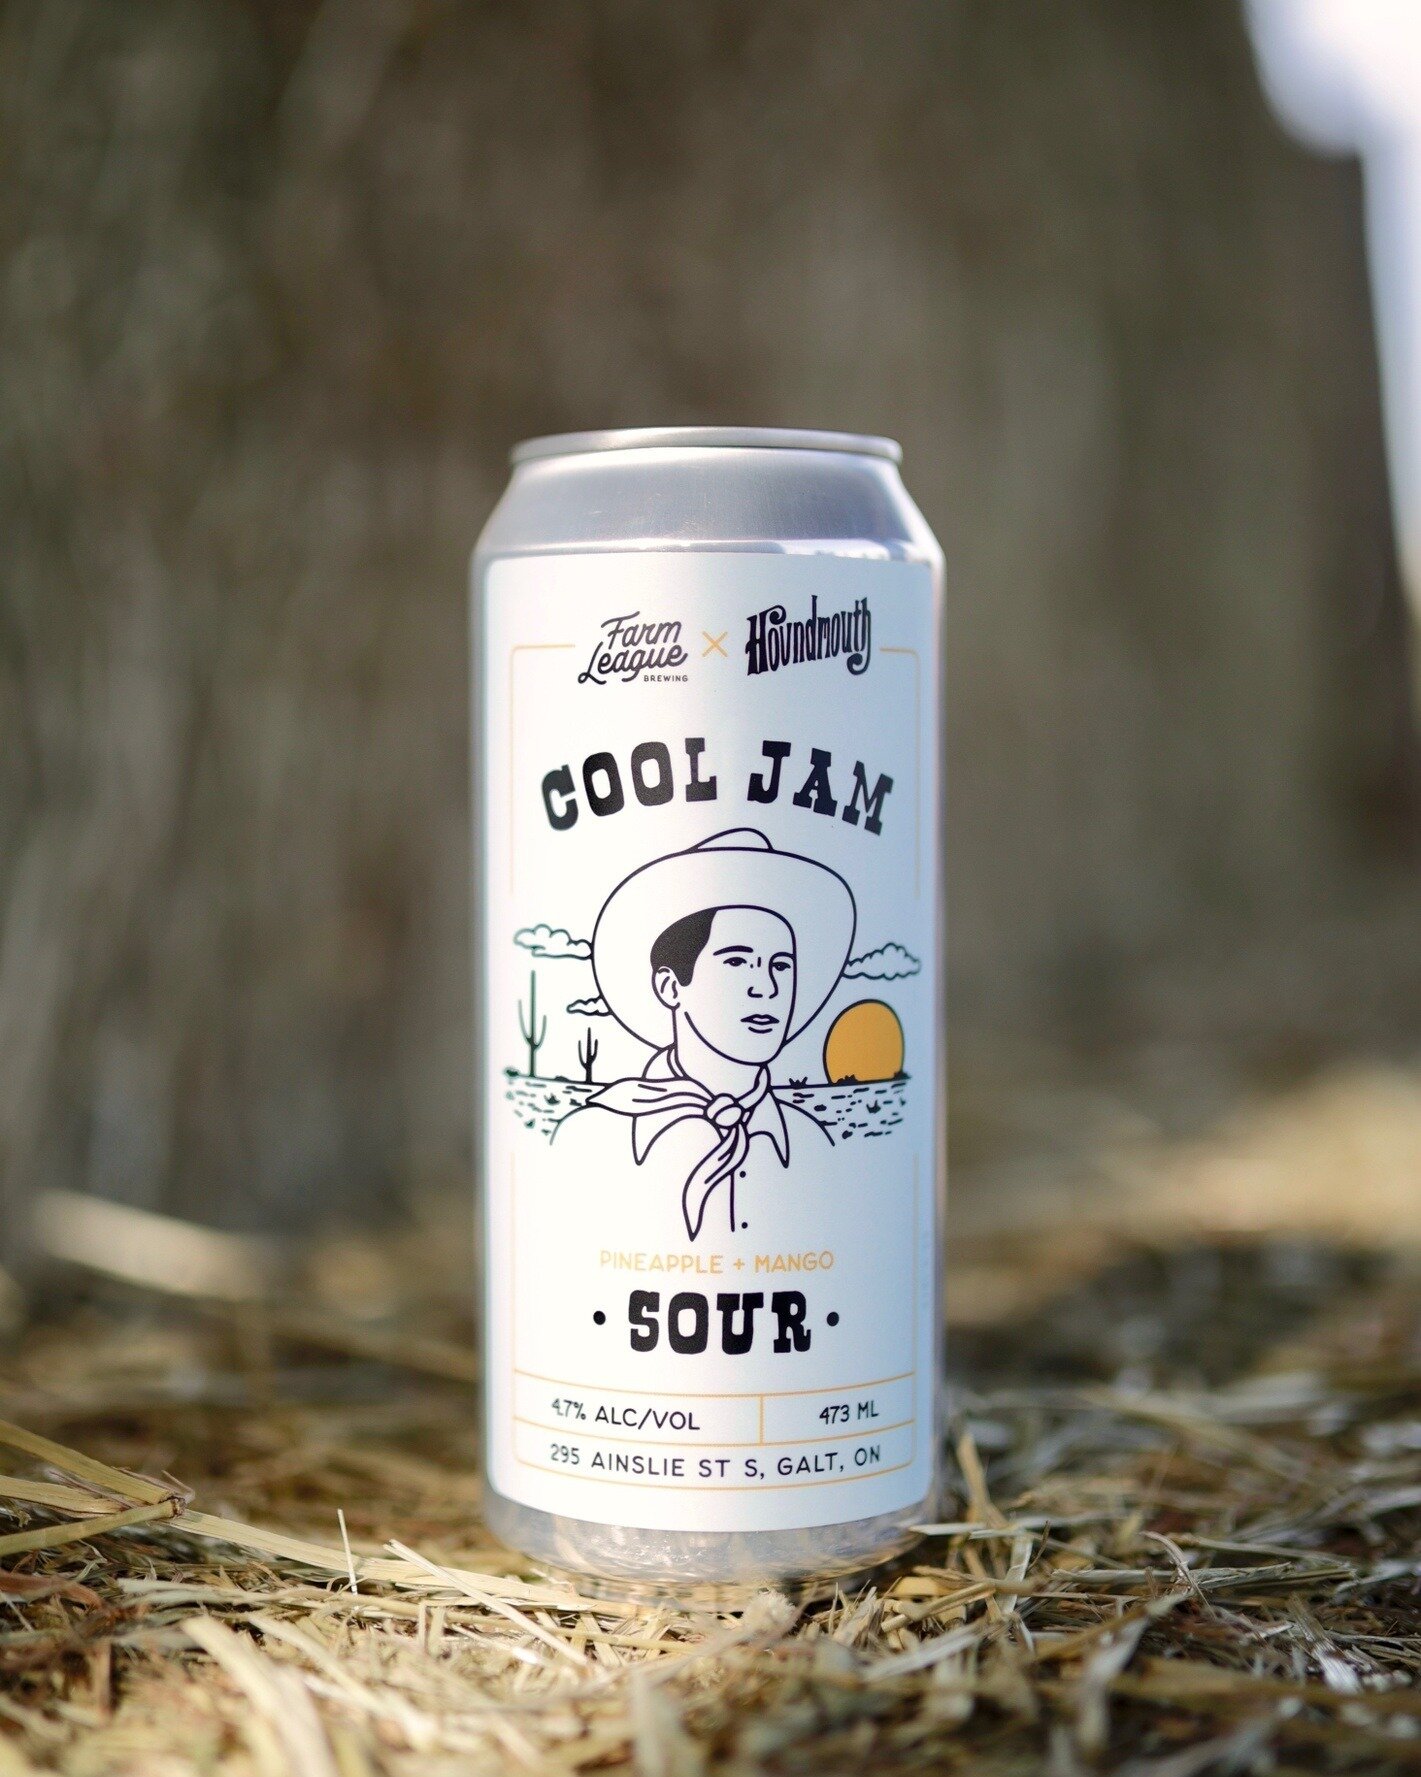 TORONTO &ndash; We teamed up with @farmleaguebrewing to make a very special &quot;Cool Jam&quot; Sour. With heavy pineapple and mango tropical flavors, this sour is a fruit bomb. Grab yourself a taste of Houndmouth at @thephoenixtoronto tomorrow or o